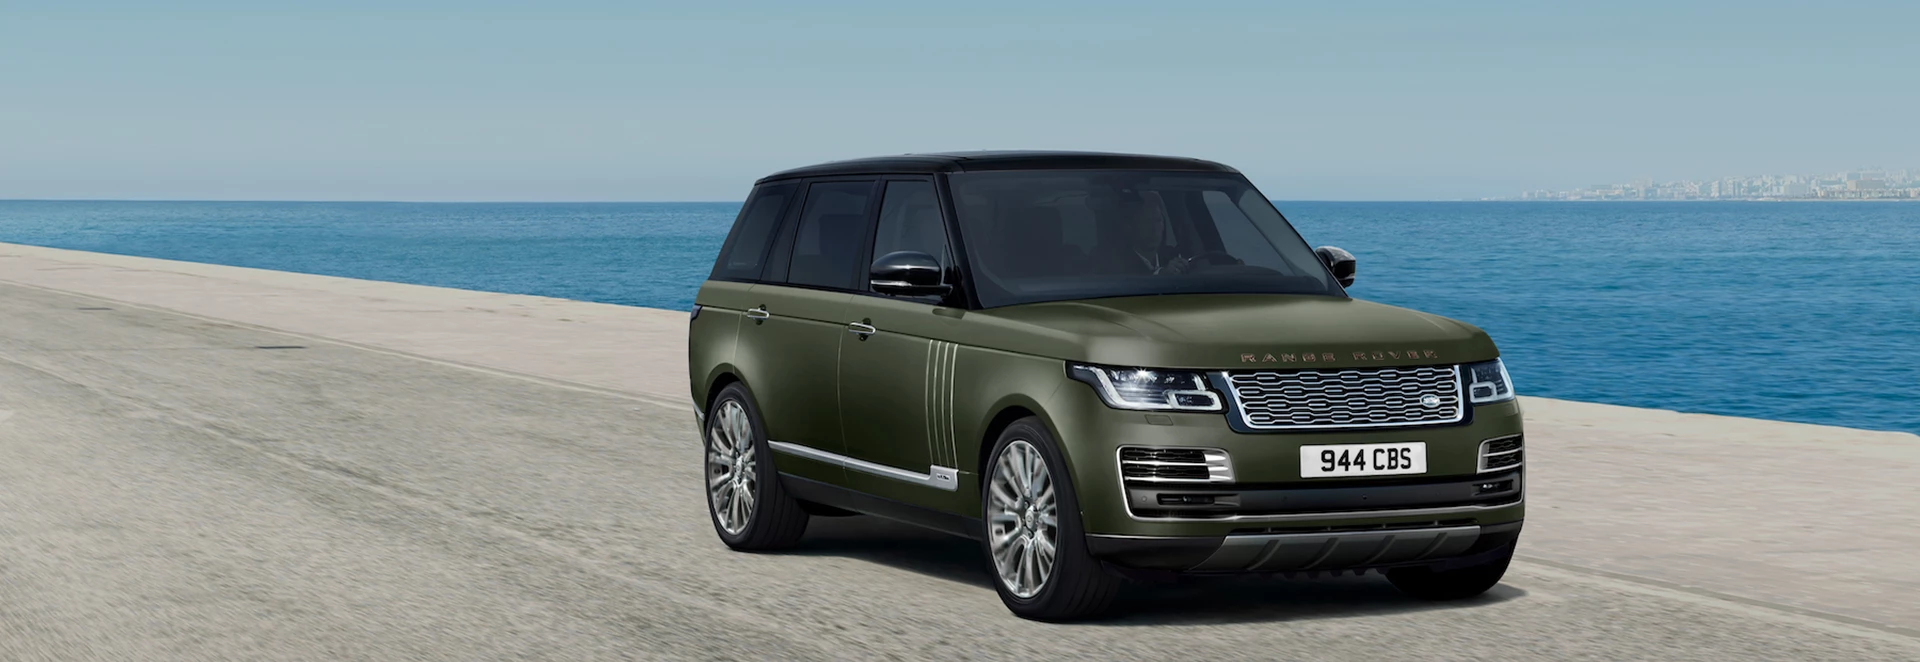 New Range Rover Ultimate editions arrive at the top of the off-roader’s line-up 